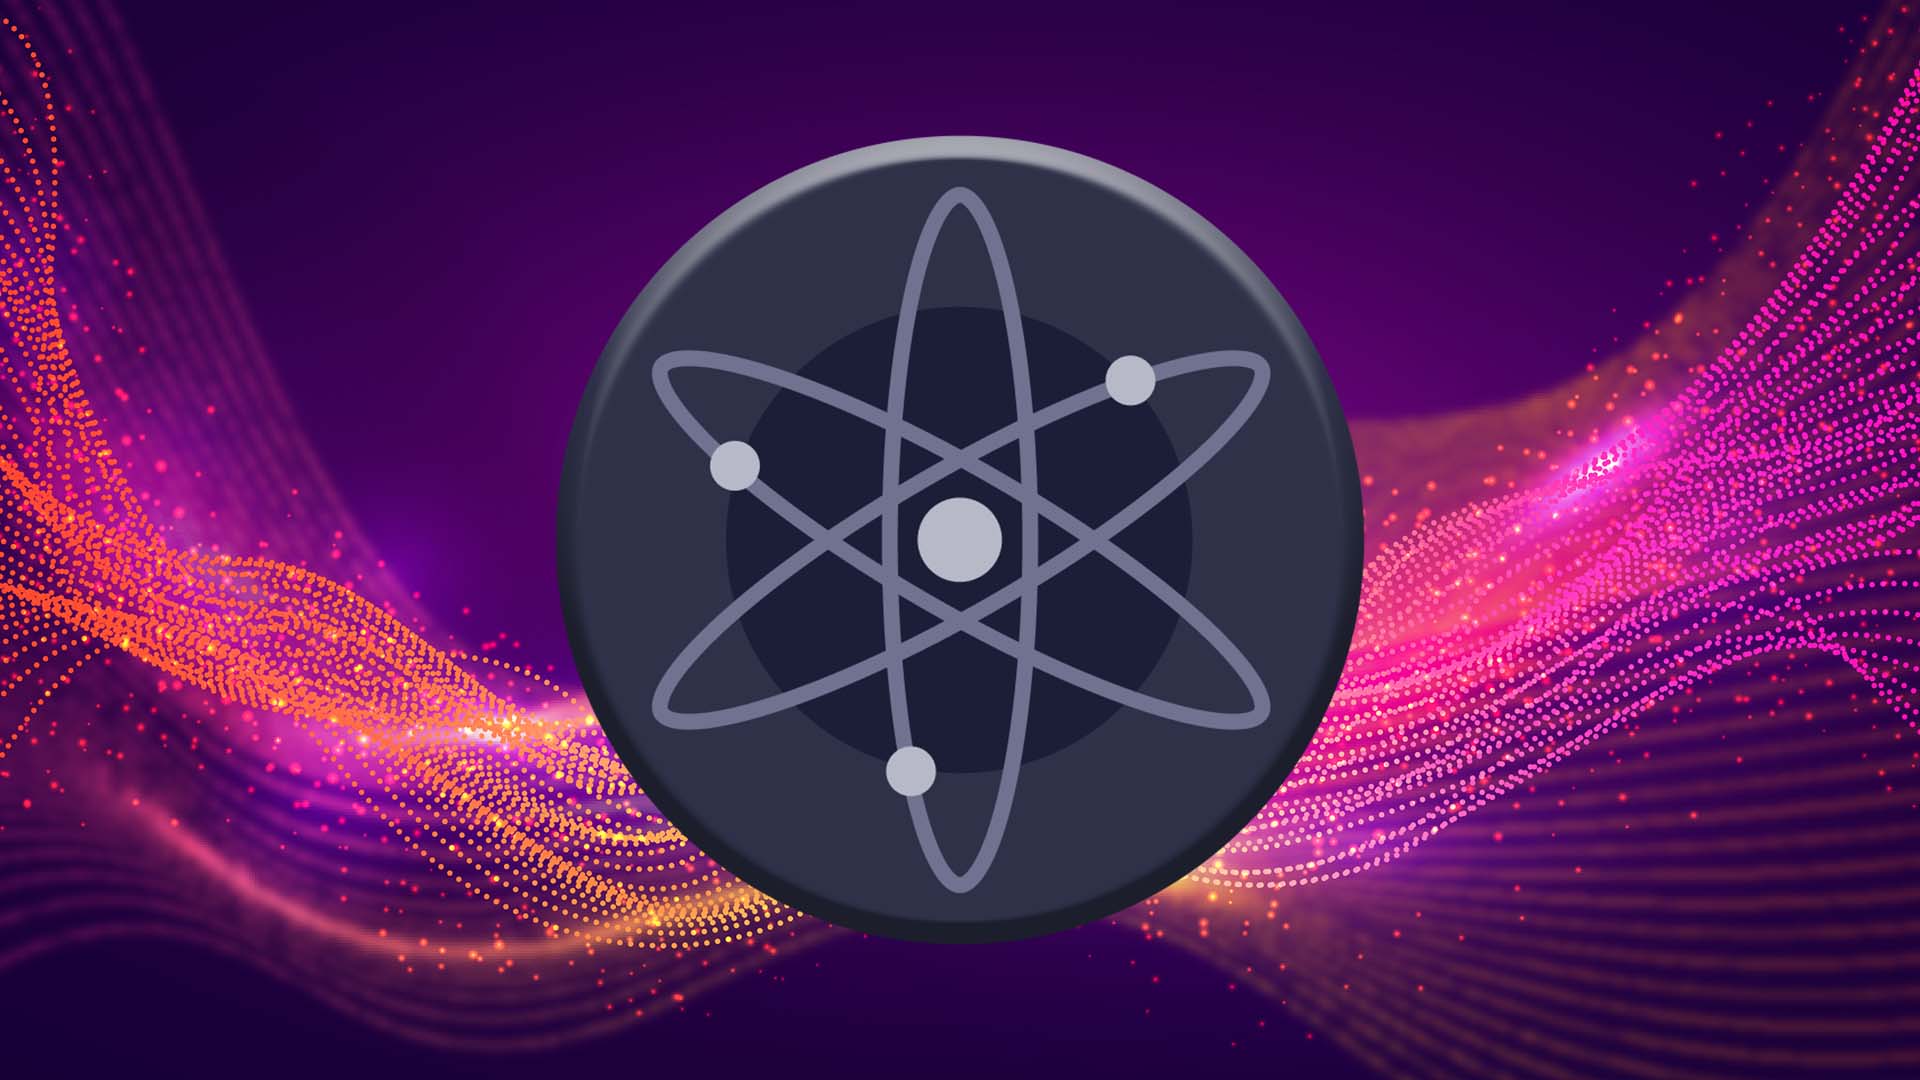 Cosmos Price Analysis: Will Price Hold Above $10 After Atom 2.0 Rejection?